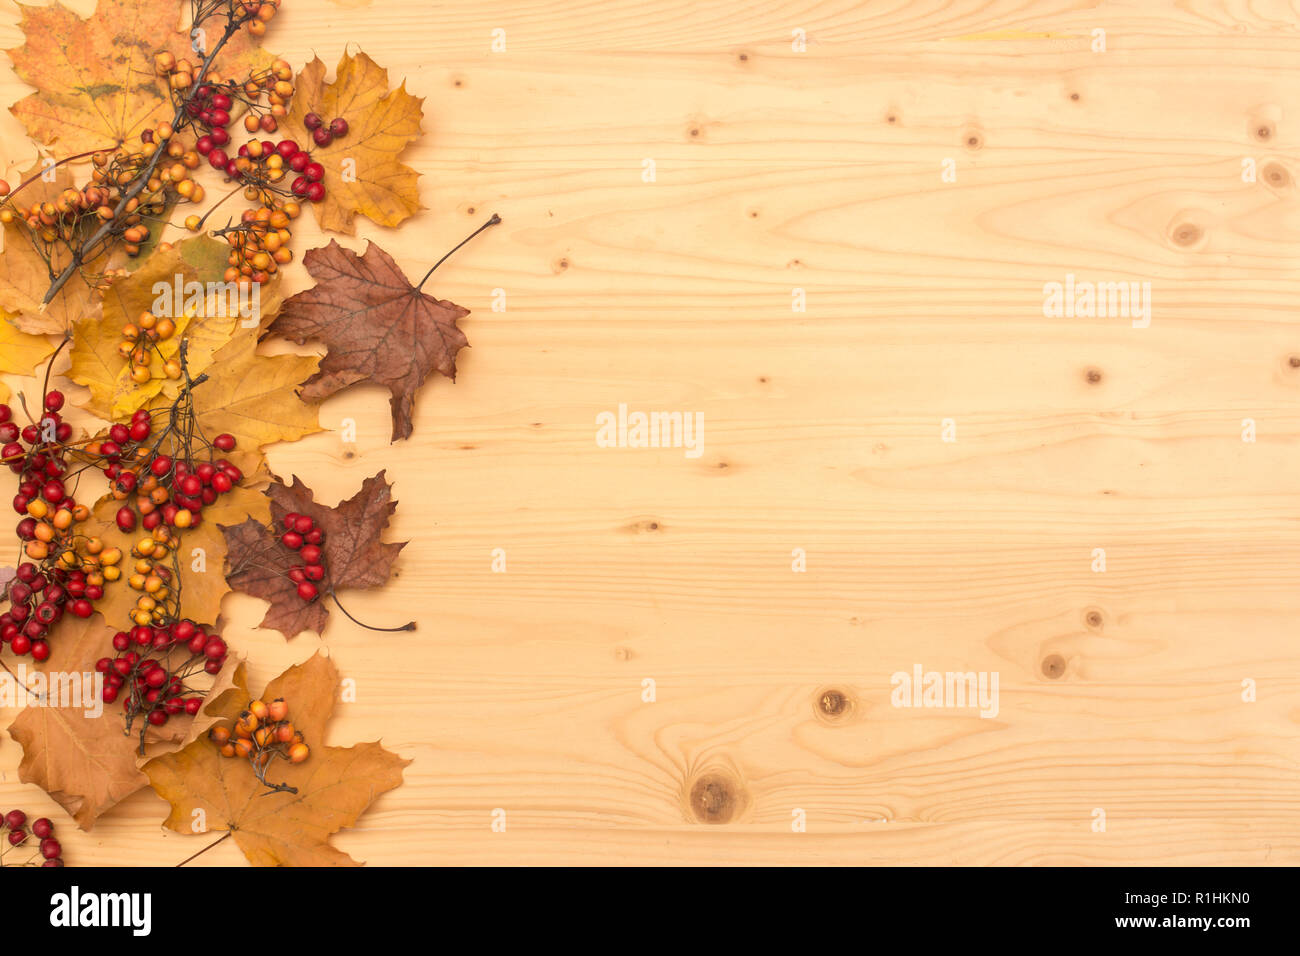 Autumn background with fall leave and fruits on wooden table Stock Photo